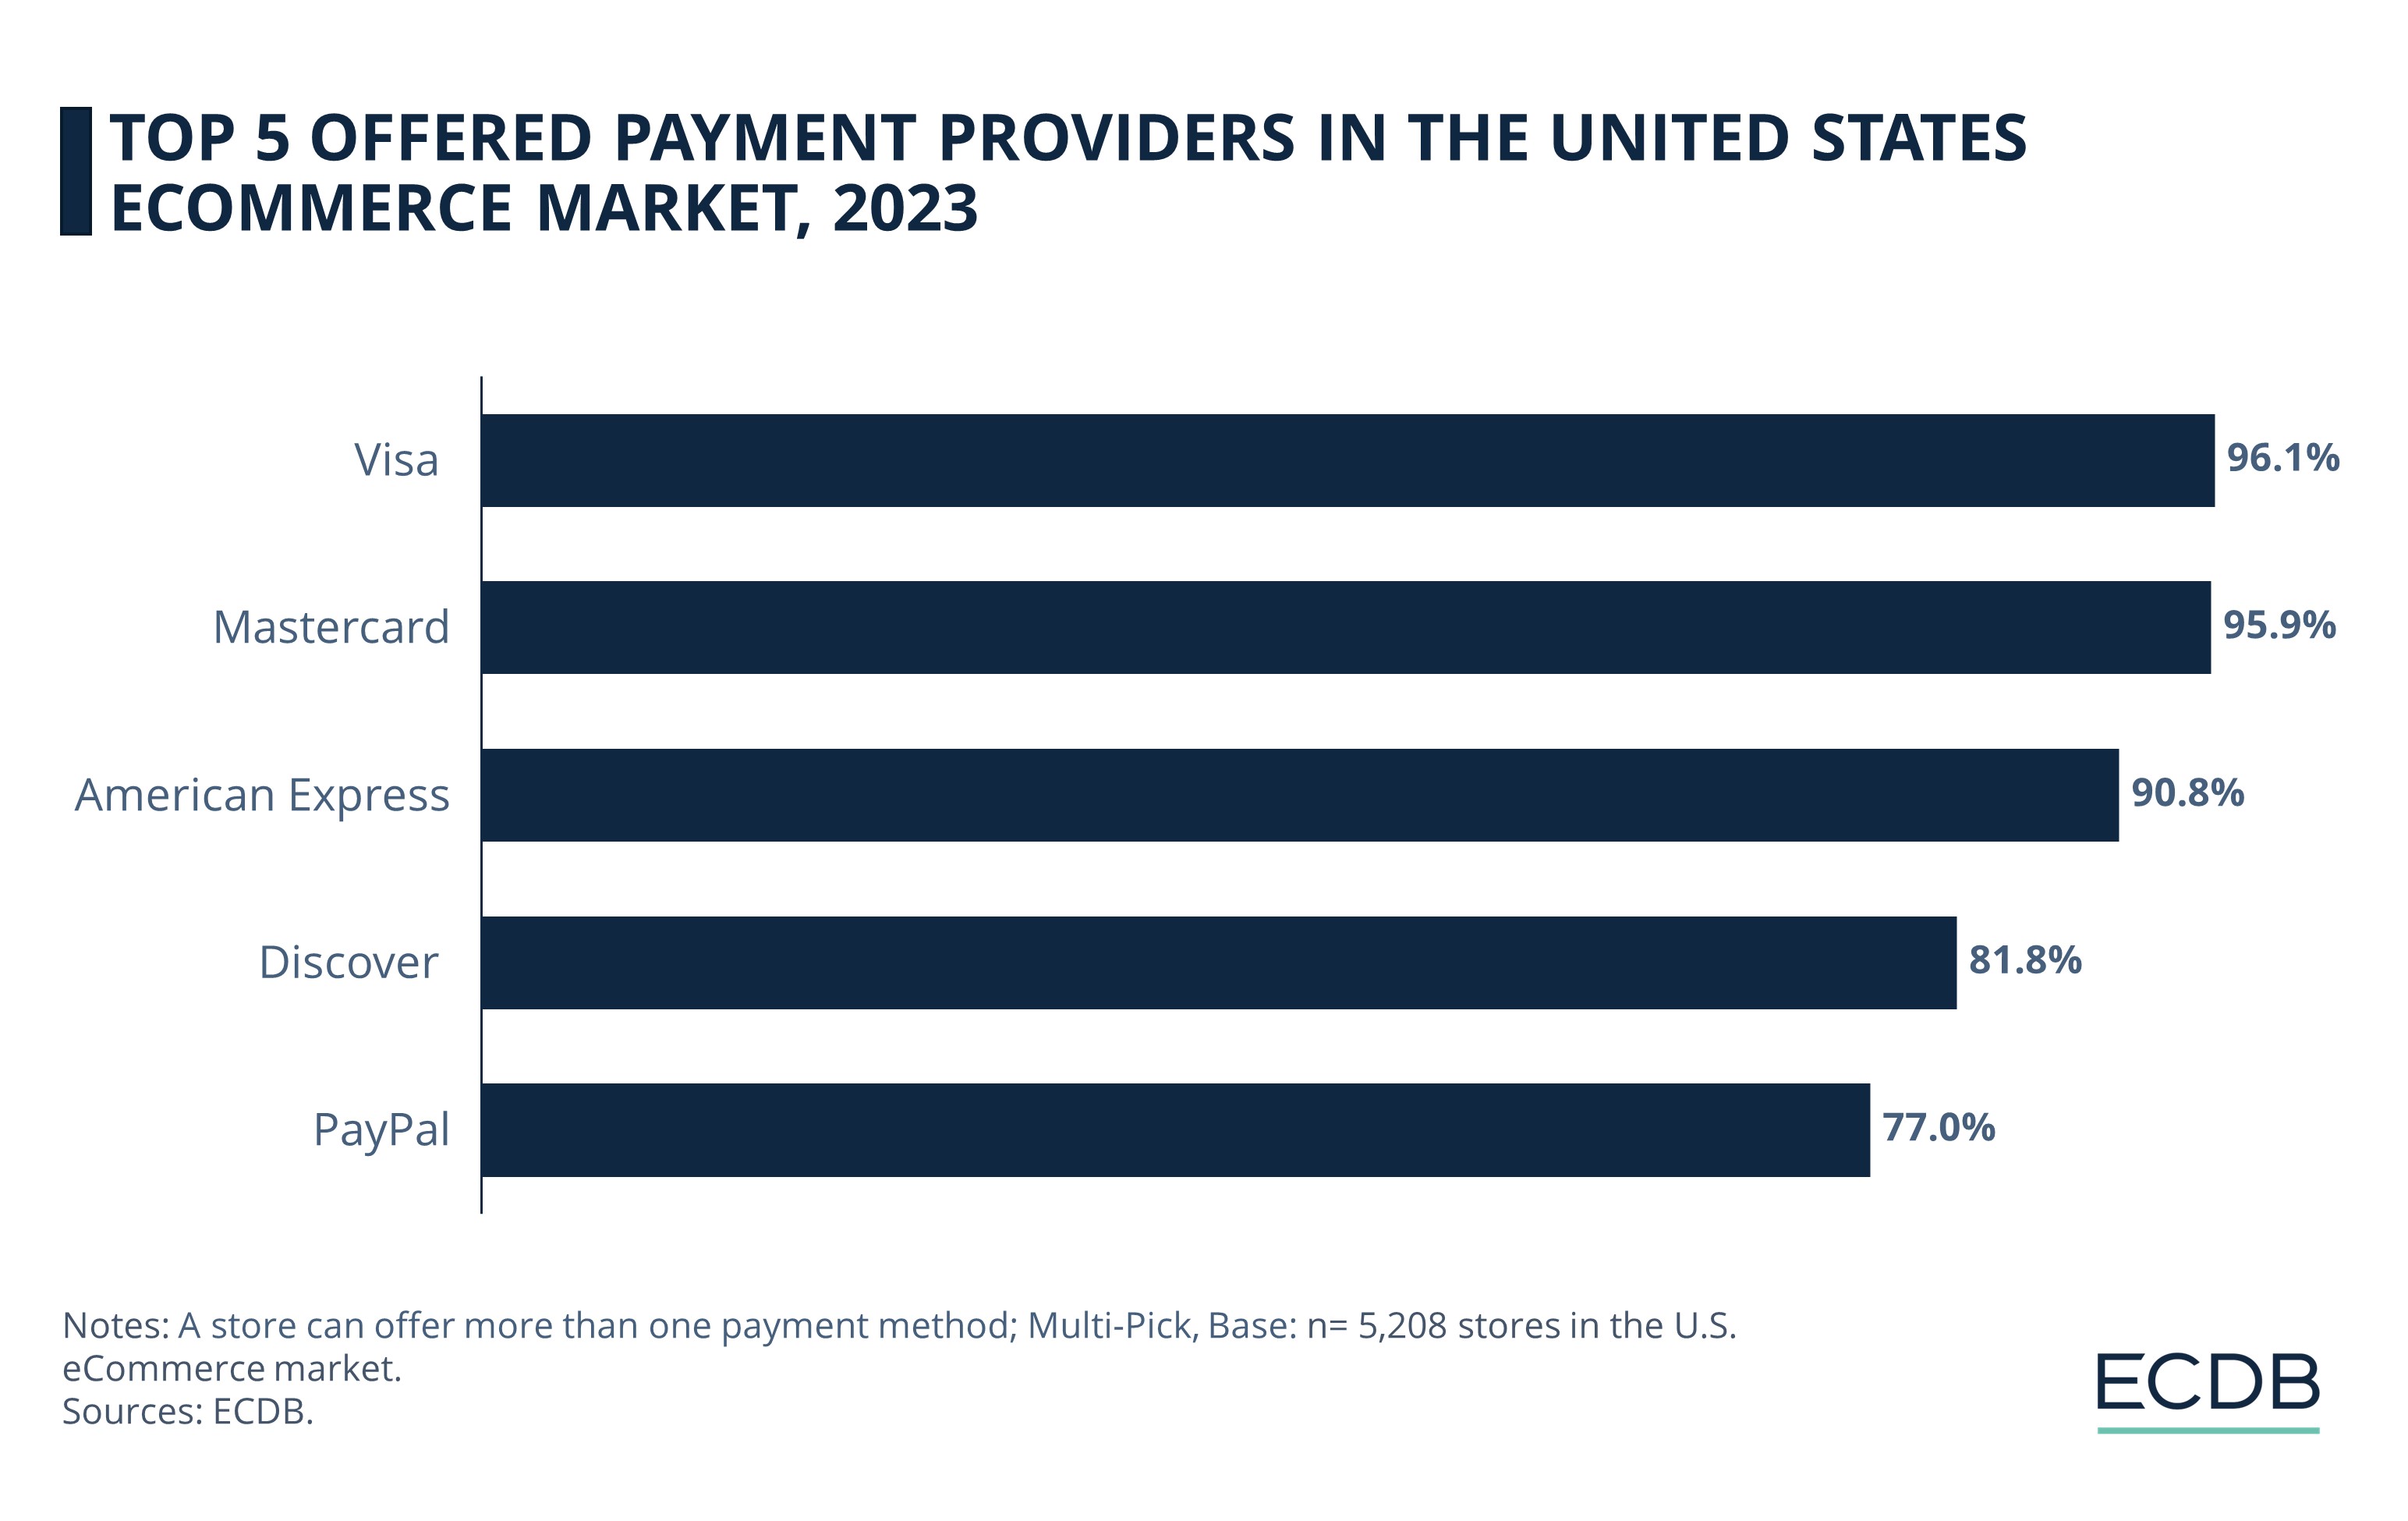 Top 5 Offered Payment Providers In The United States Ecommerce Market, 2023